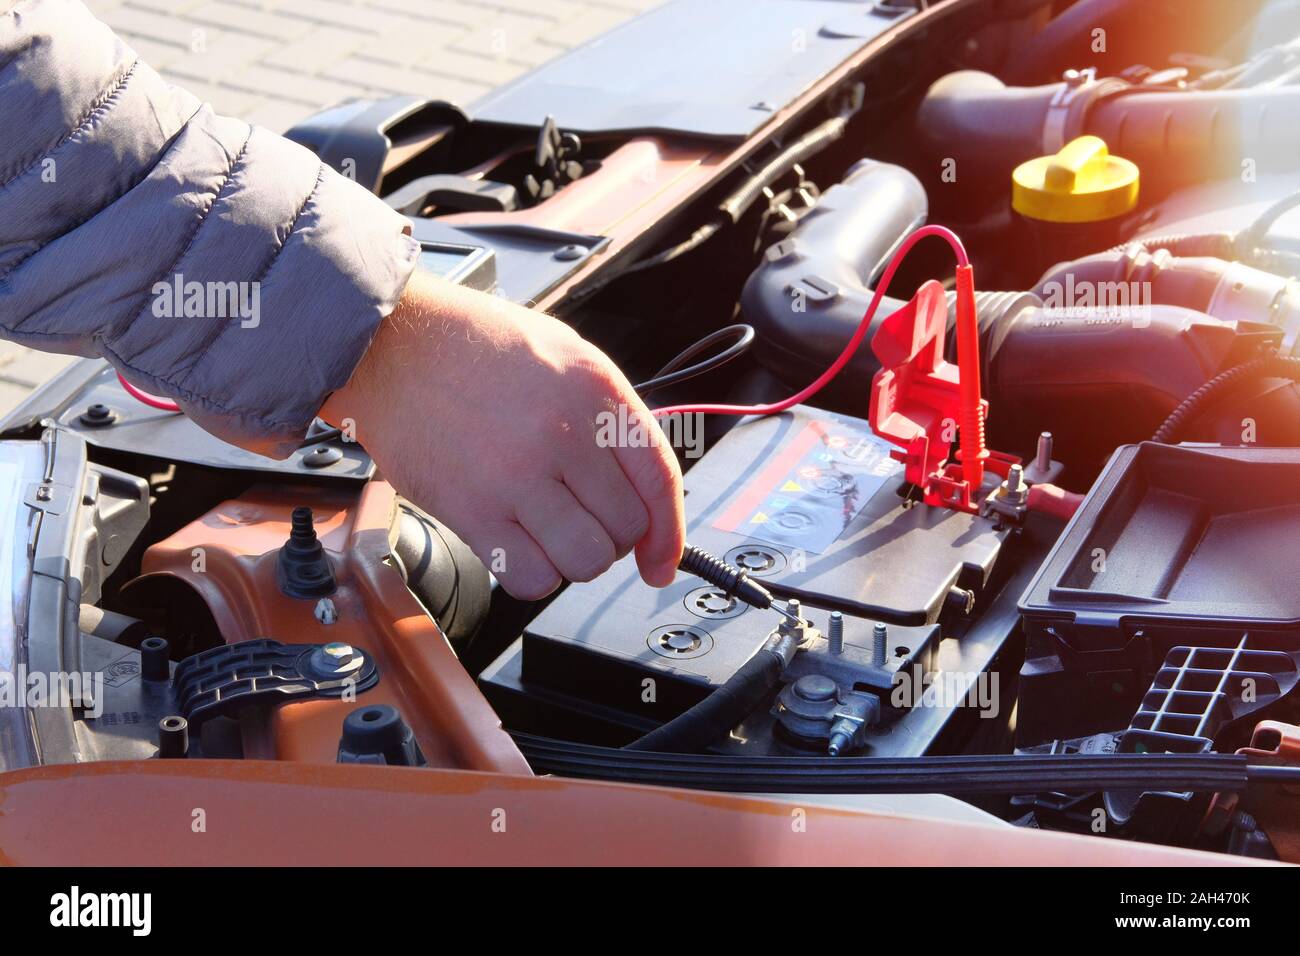 Measurement of battery voltage in a car. Car mechanic is using a multimeter with voltage range measurement. Stock Photo